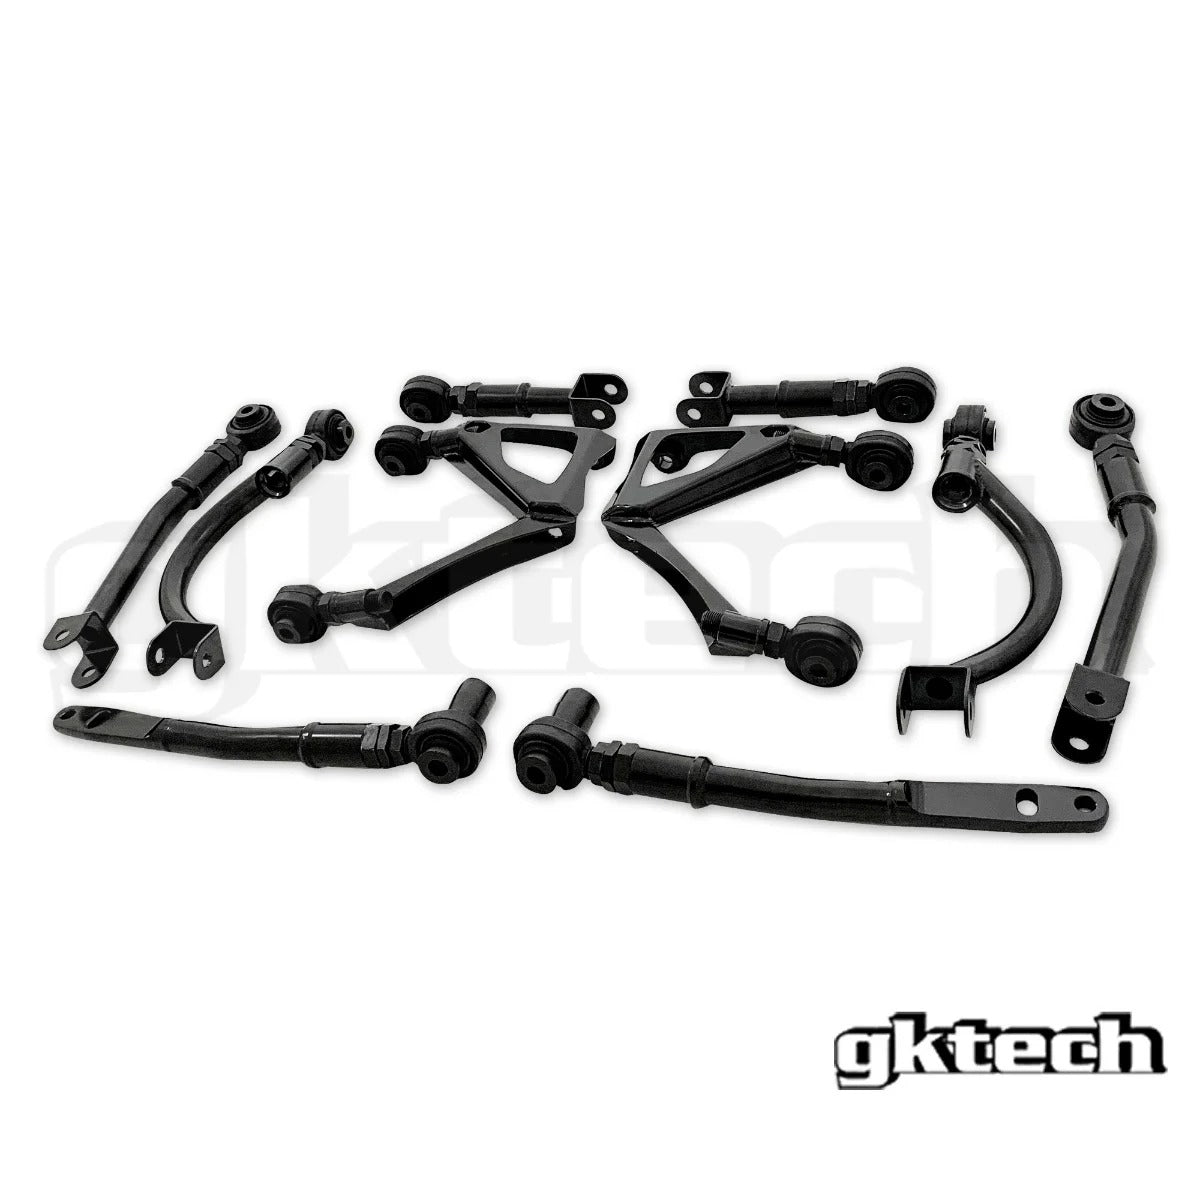 V4 - R33/R34 Skyline Suspension arm package (10% combo discount)